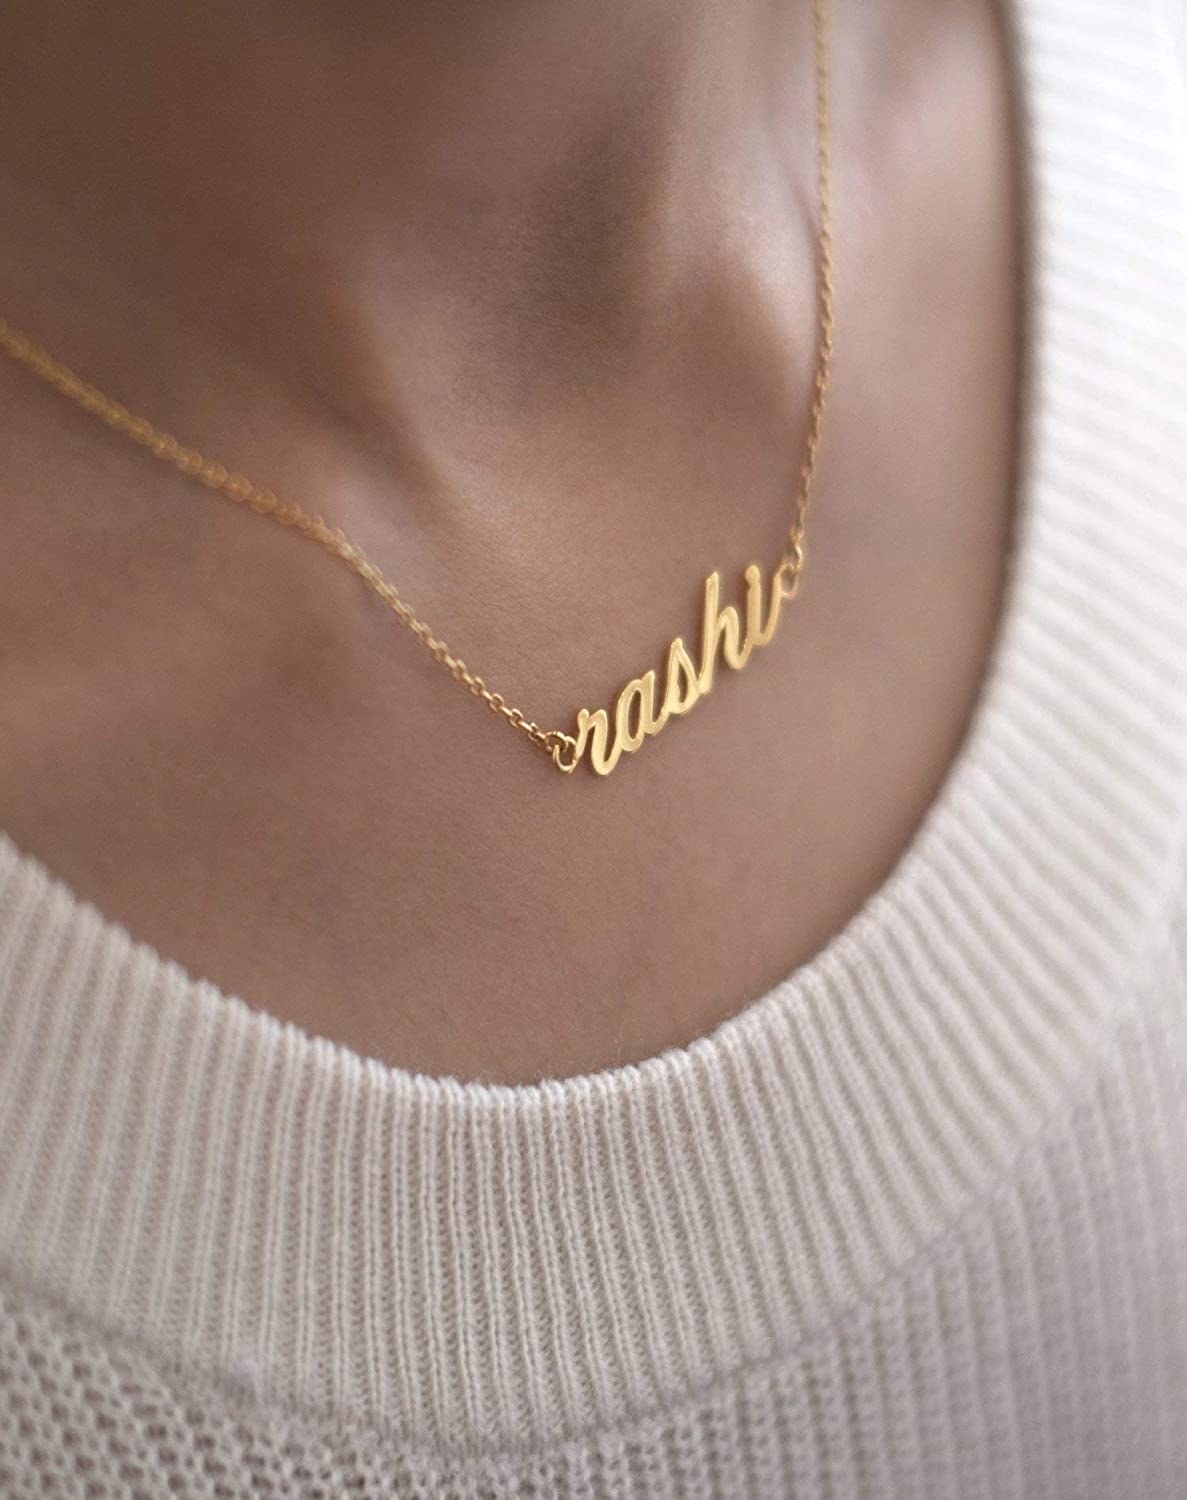 A gold-plated necklace customised with the name &#x27;Rashi&#x27;.